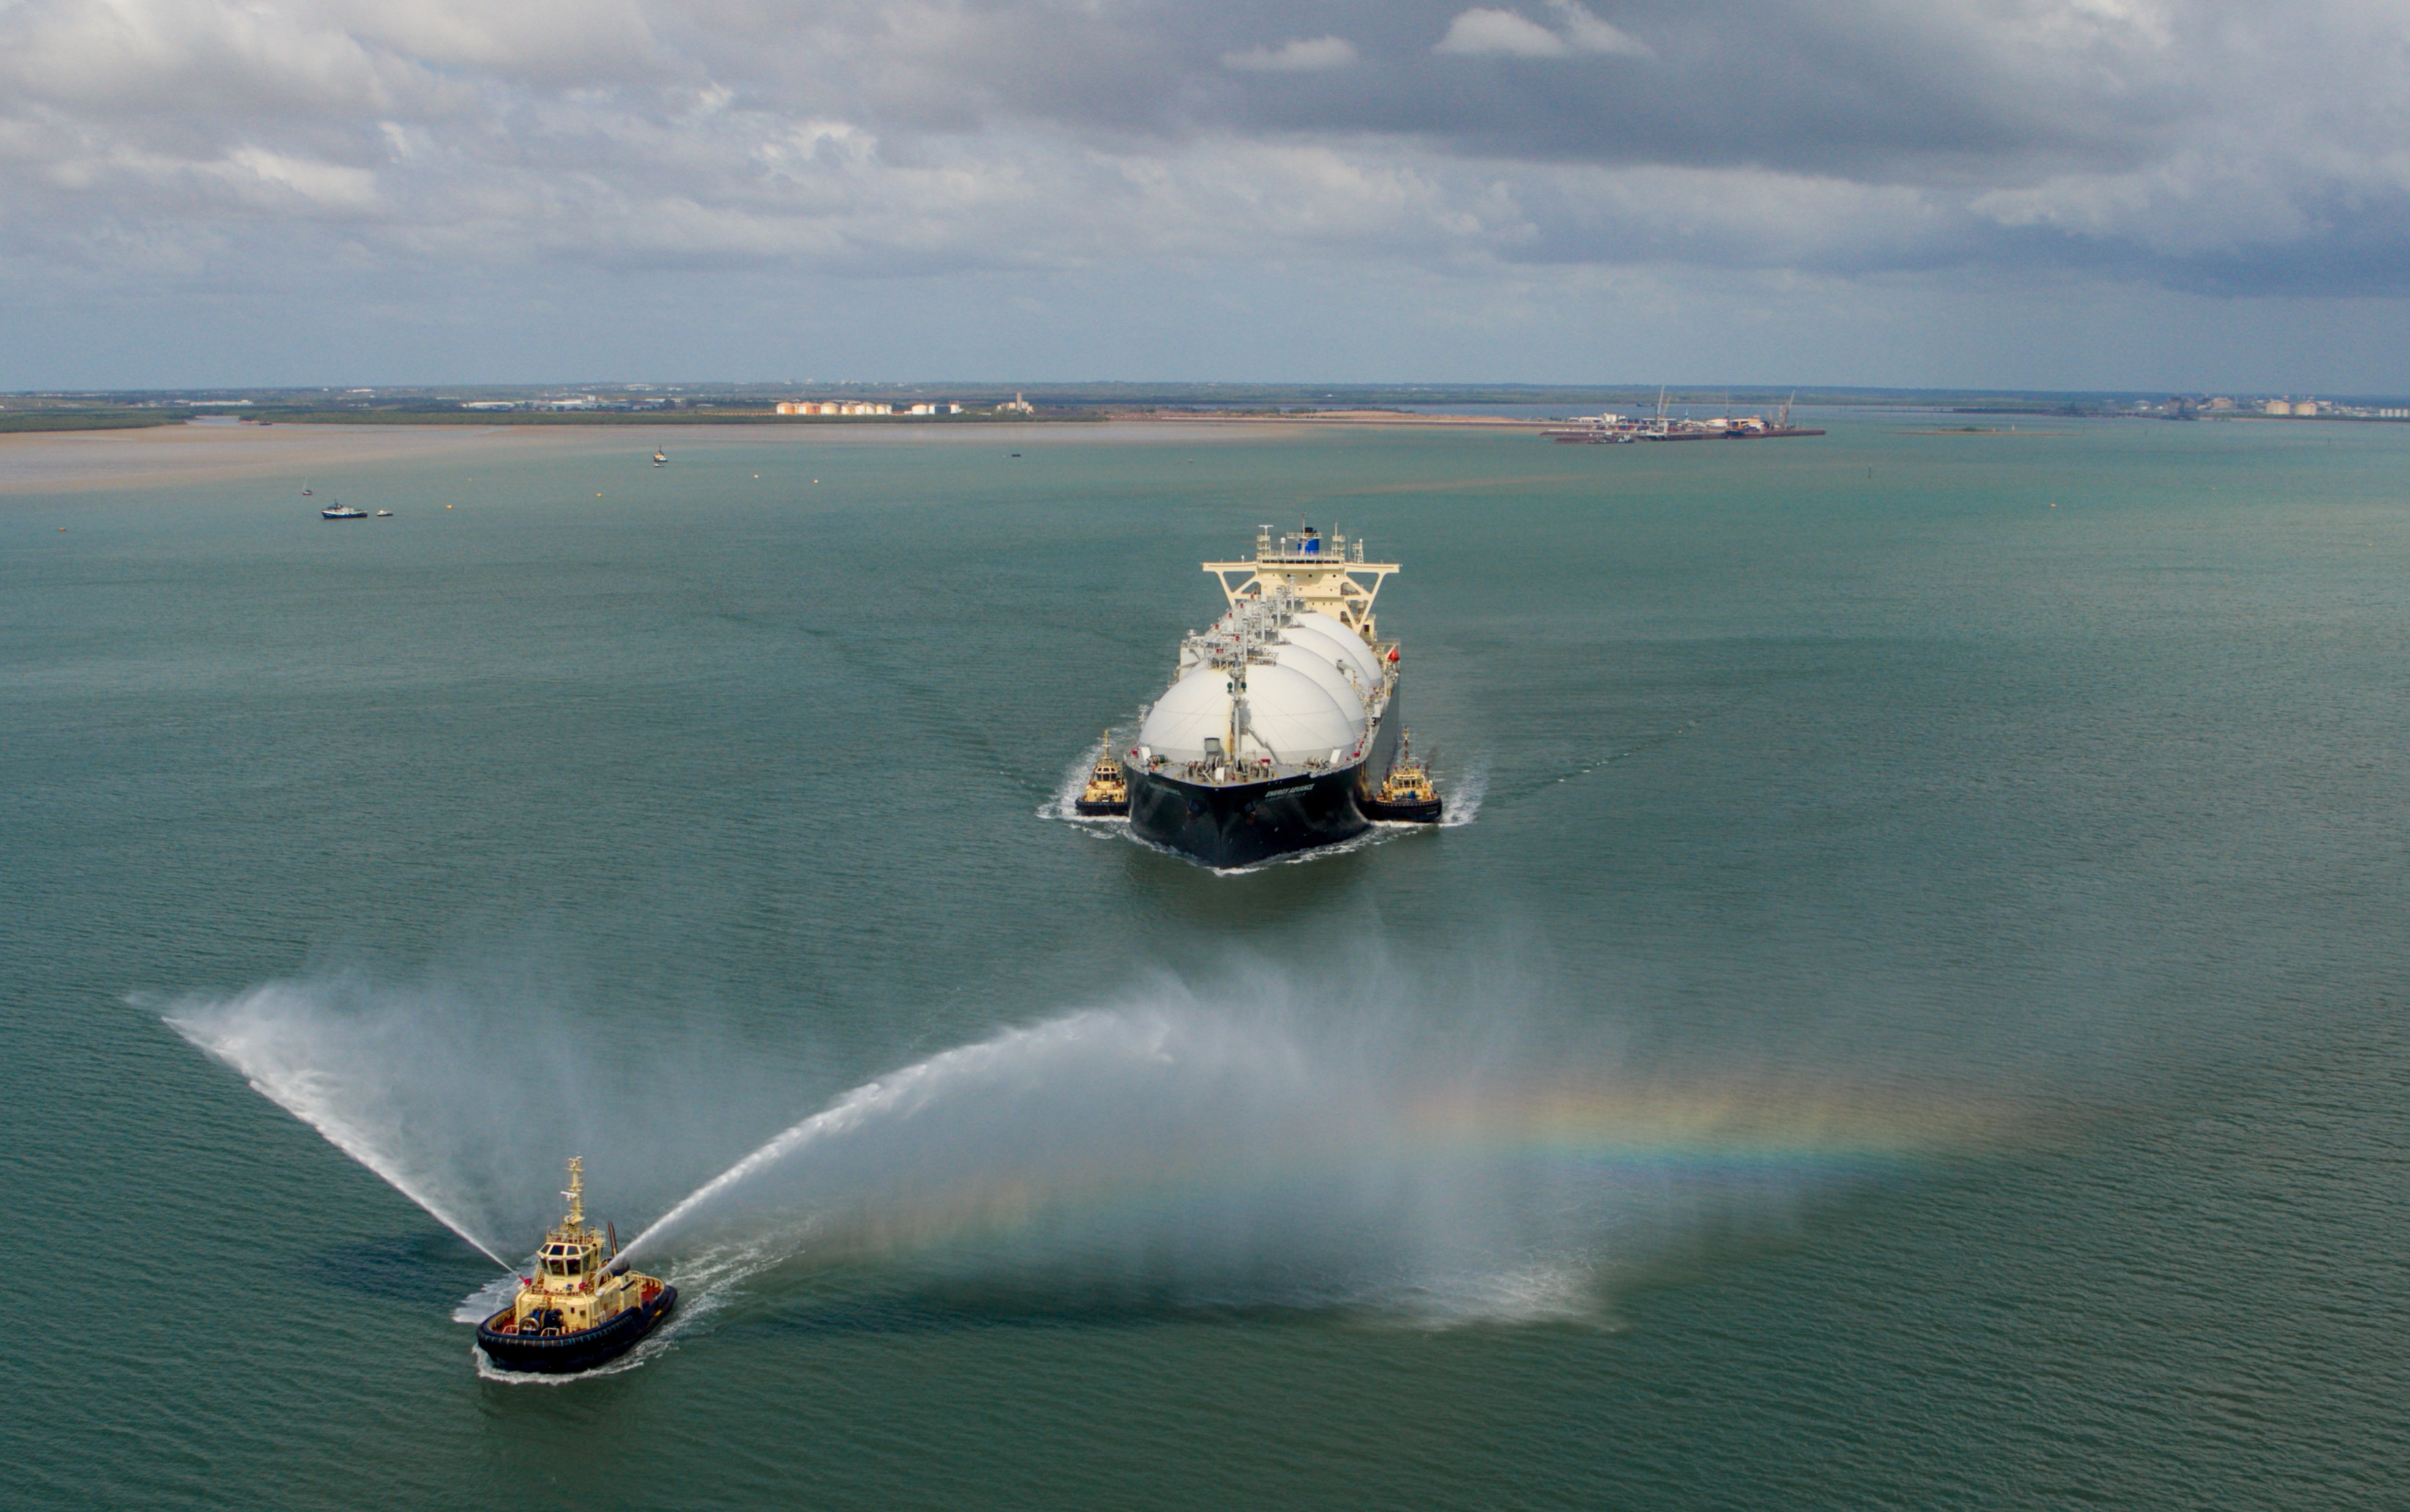 EnergyQuest: Australian LNG exports slip month on month